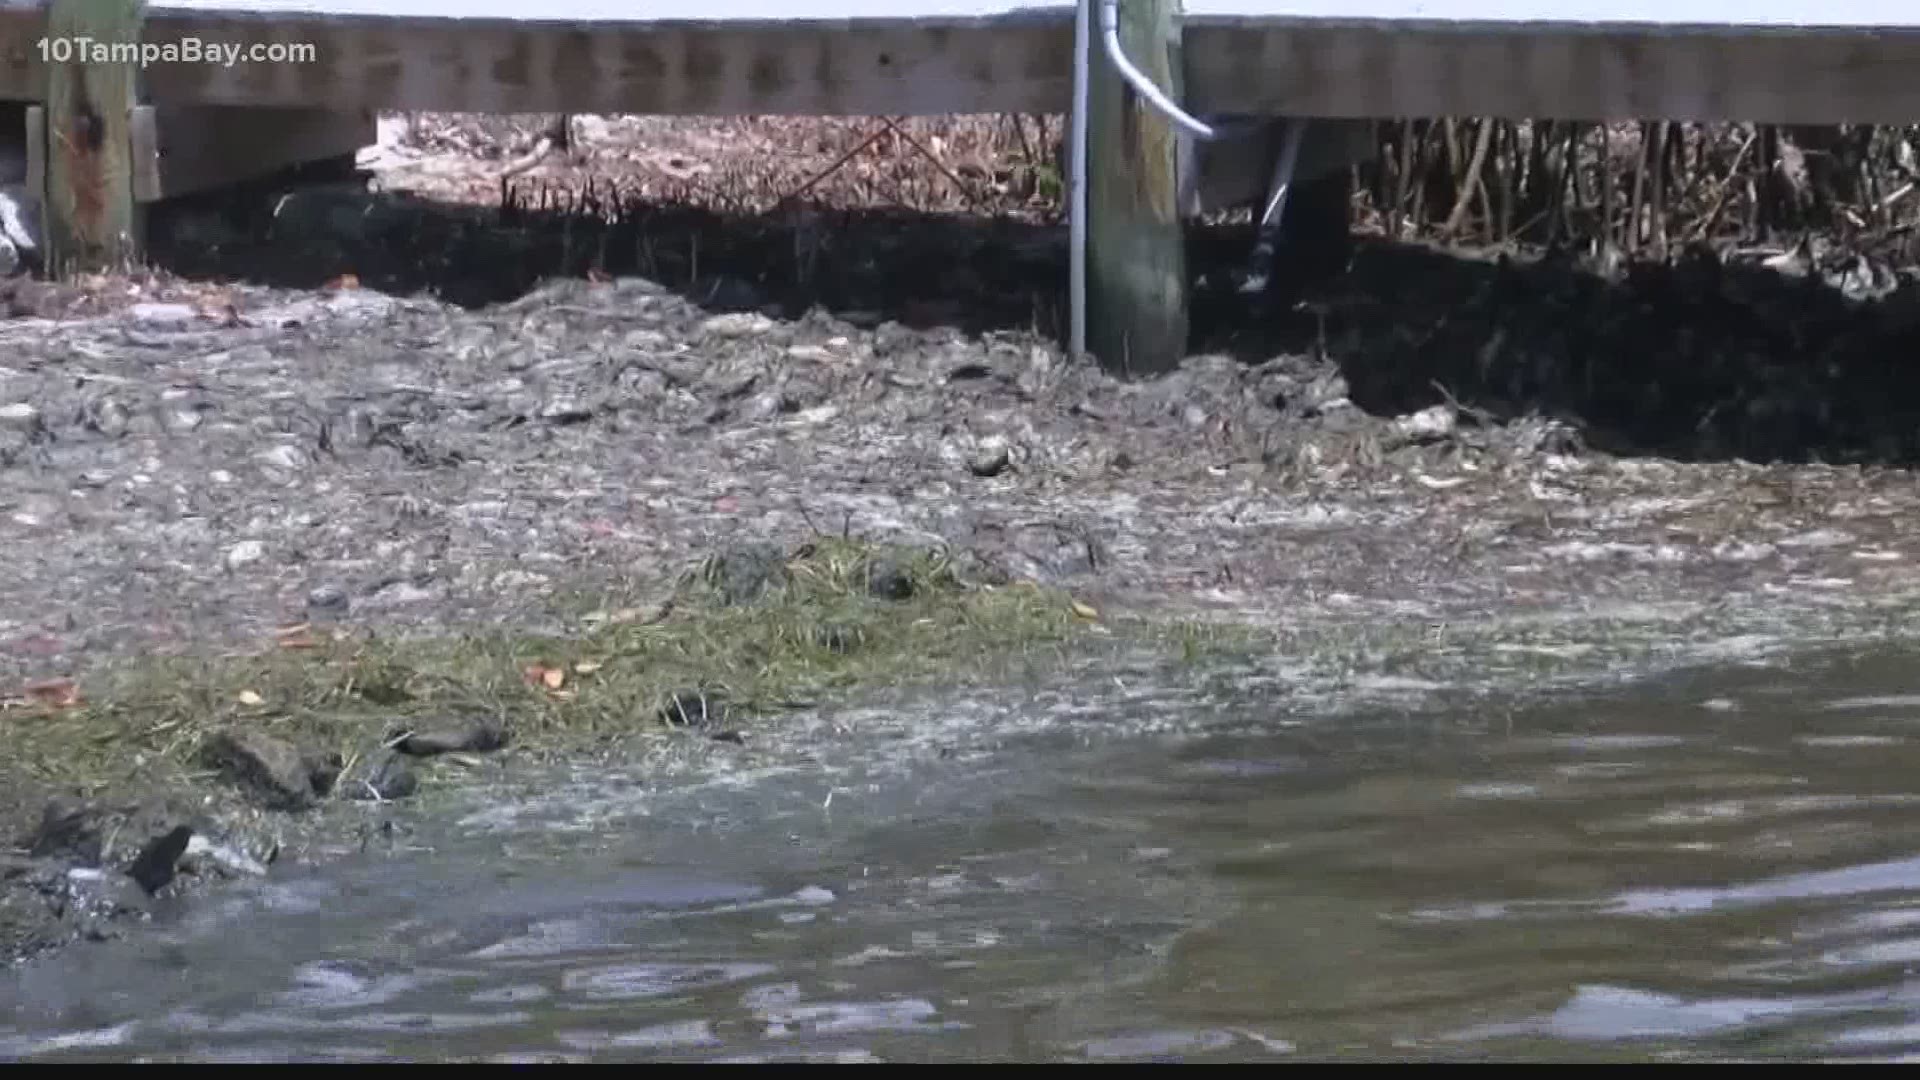 State environmental and health officials say they don’t test for COVID despite studies showing high levels in Florida sewage.